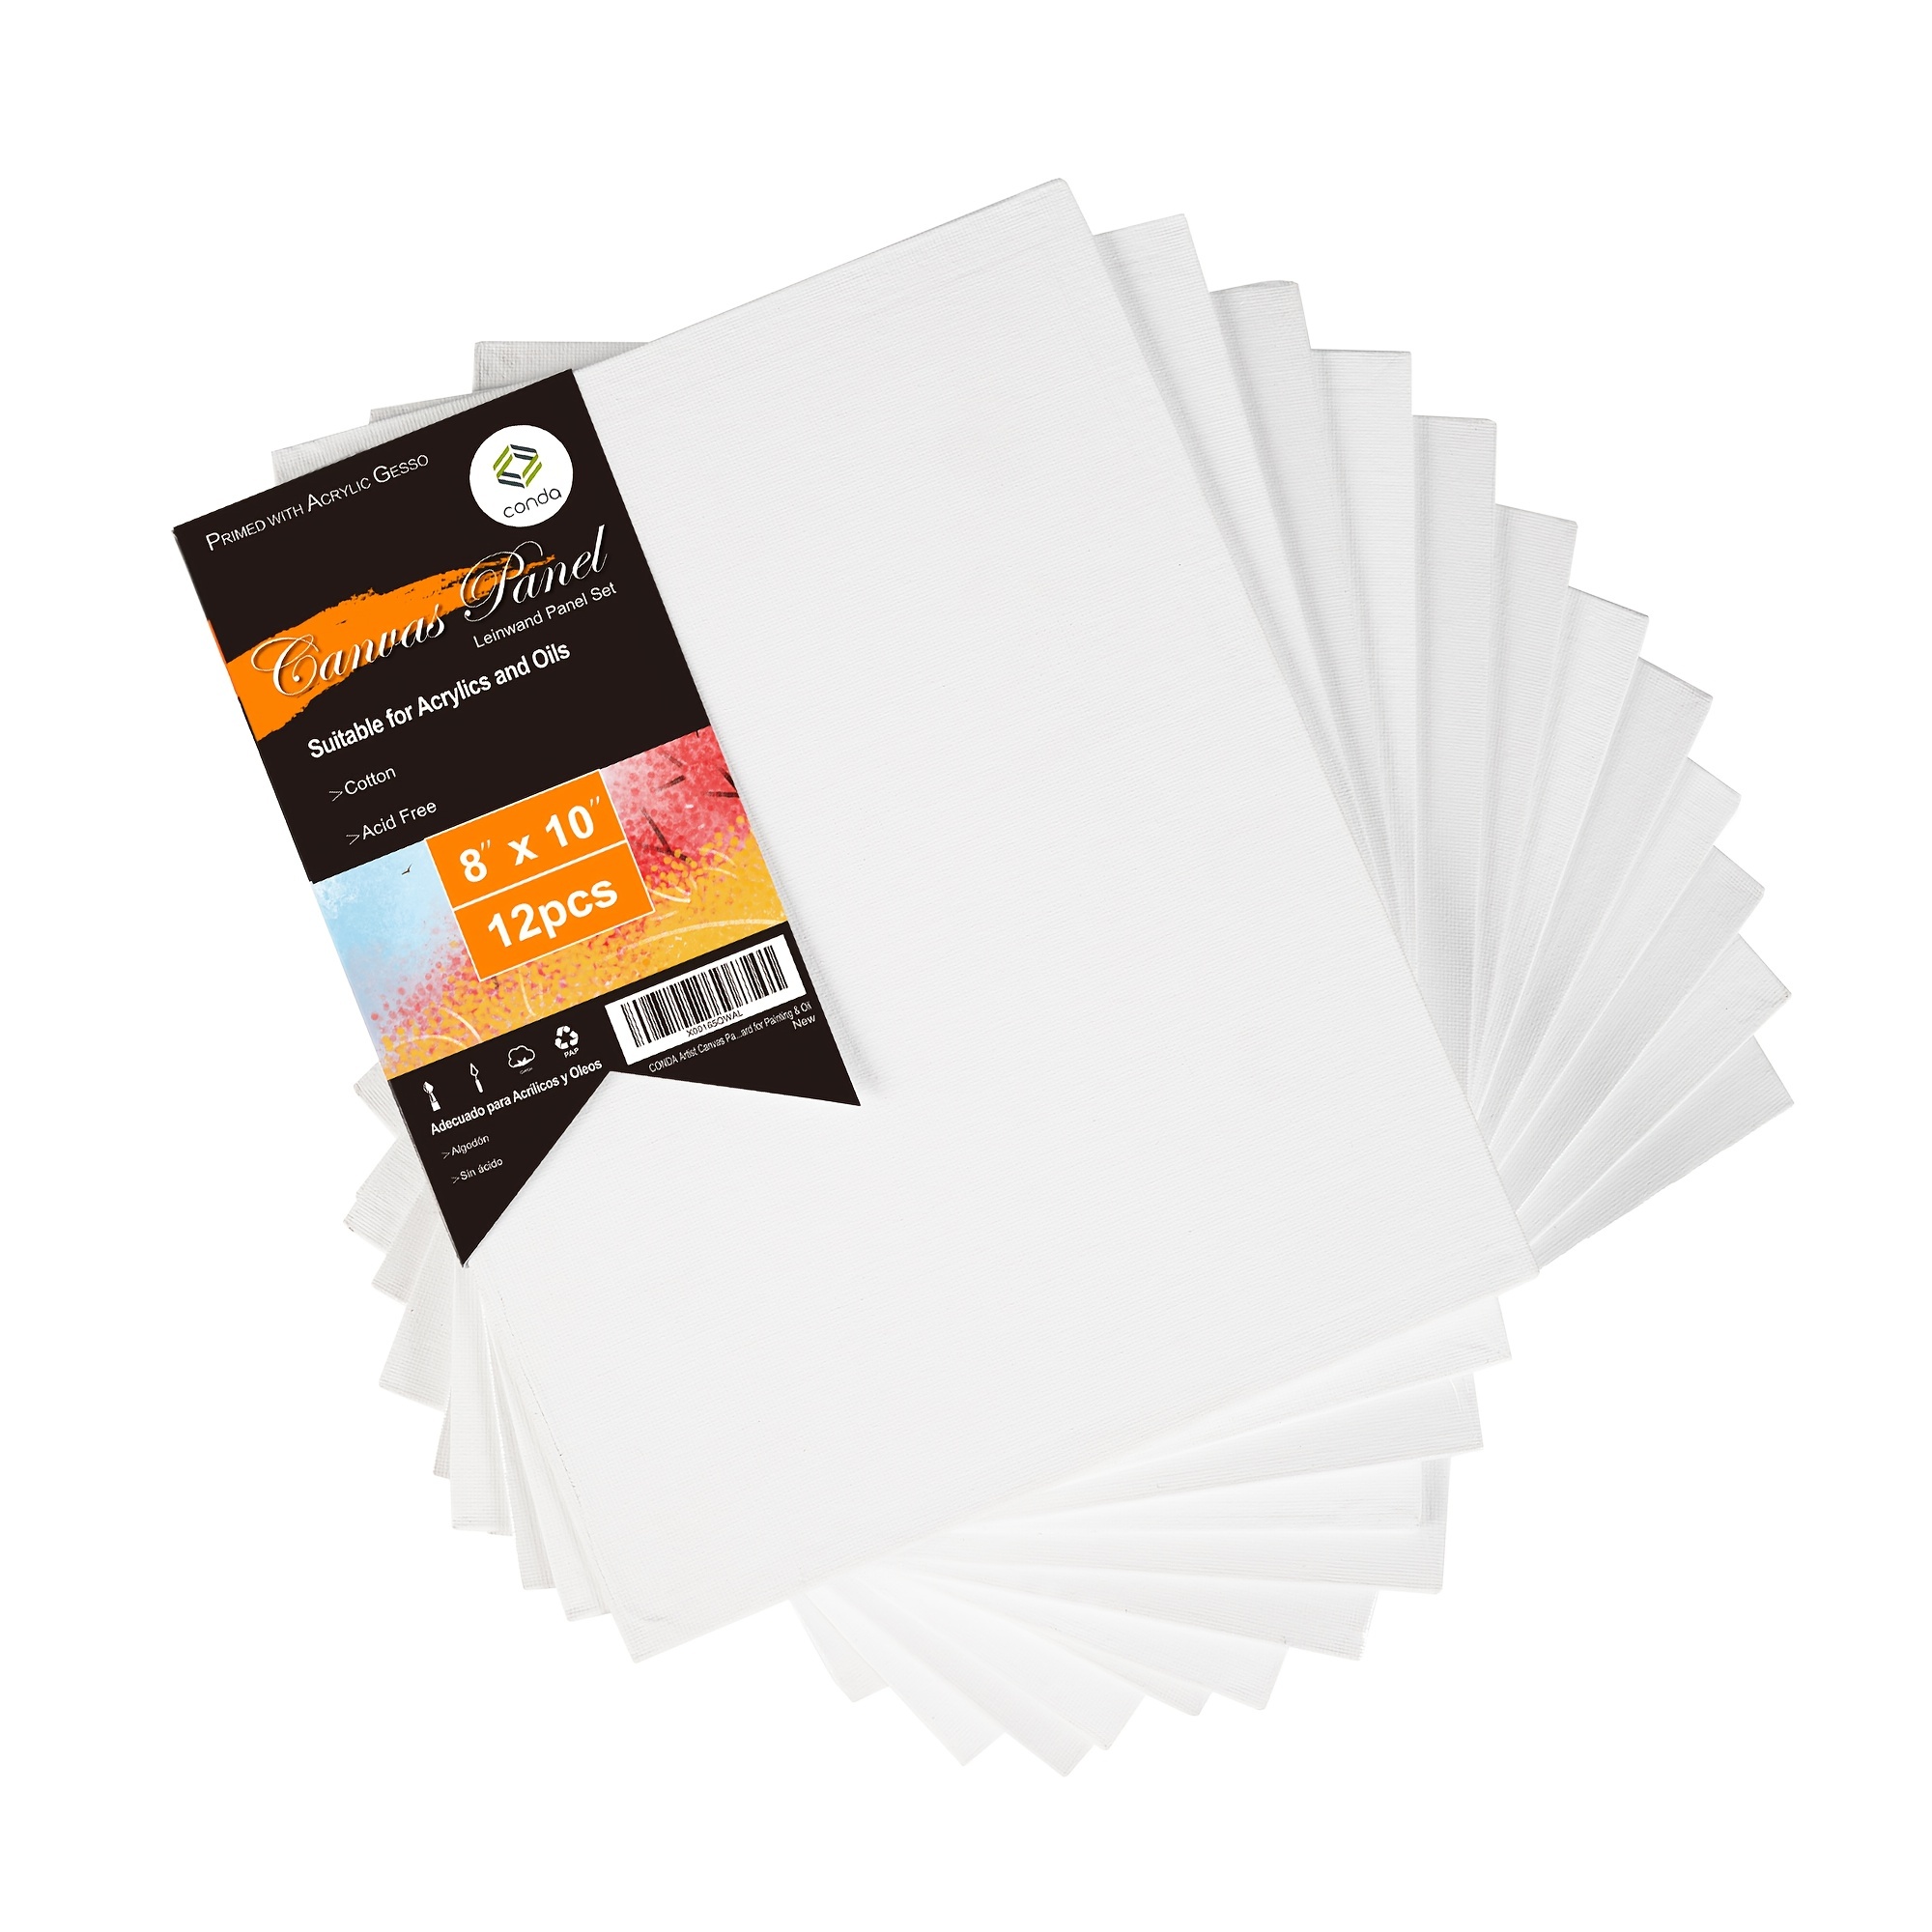 PHOENIX Painting Canvas Panels 4x4 Inch, 12 Value Pack - 8 Oz Triple Primed  100% Cotton Acid Free Canvases for Painting